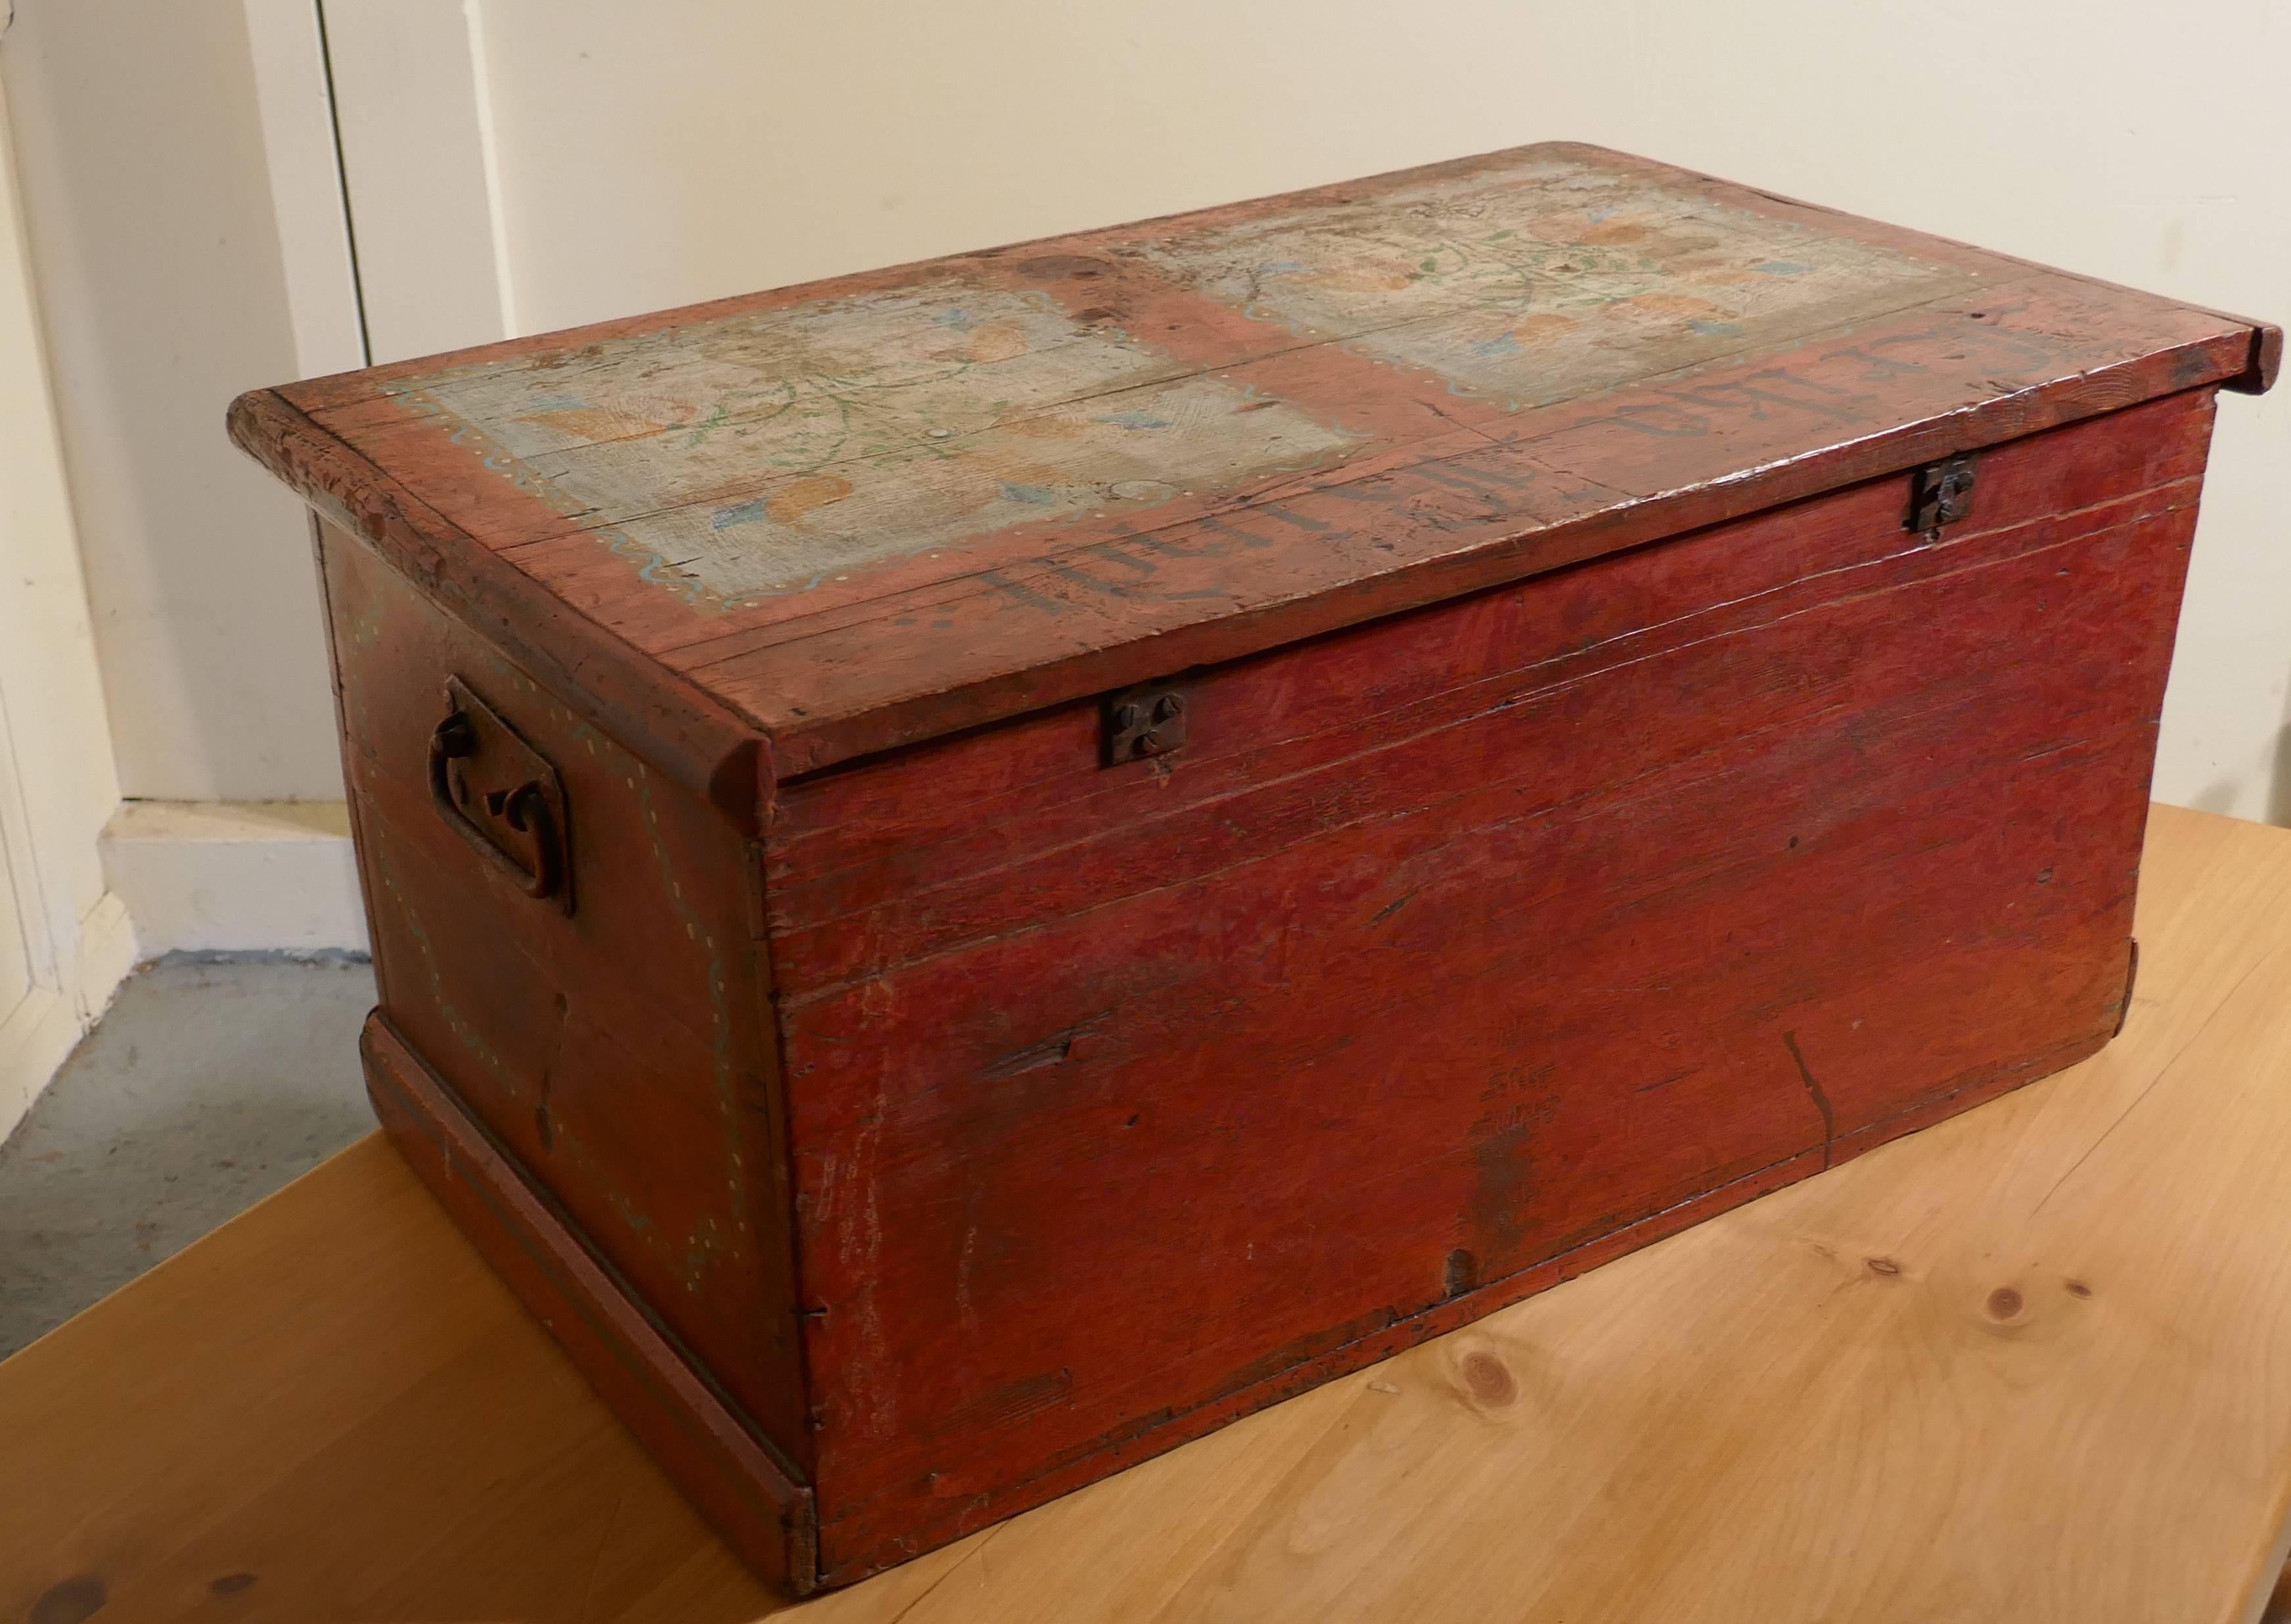 European Painted Pine Chest In Distressed Condition In Chillerton, Isle of Wight